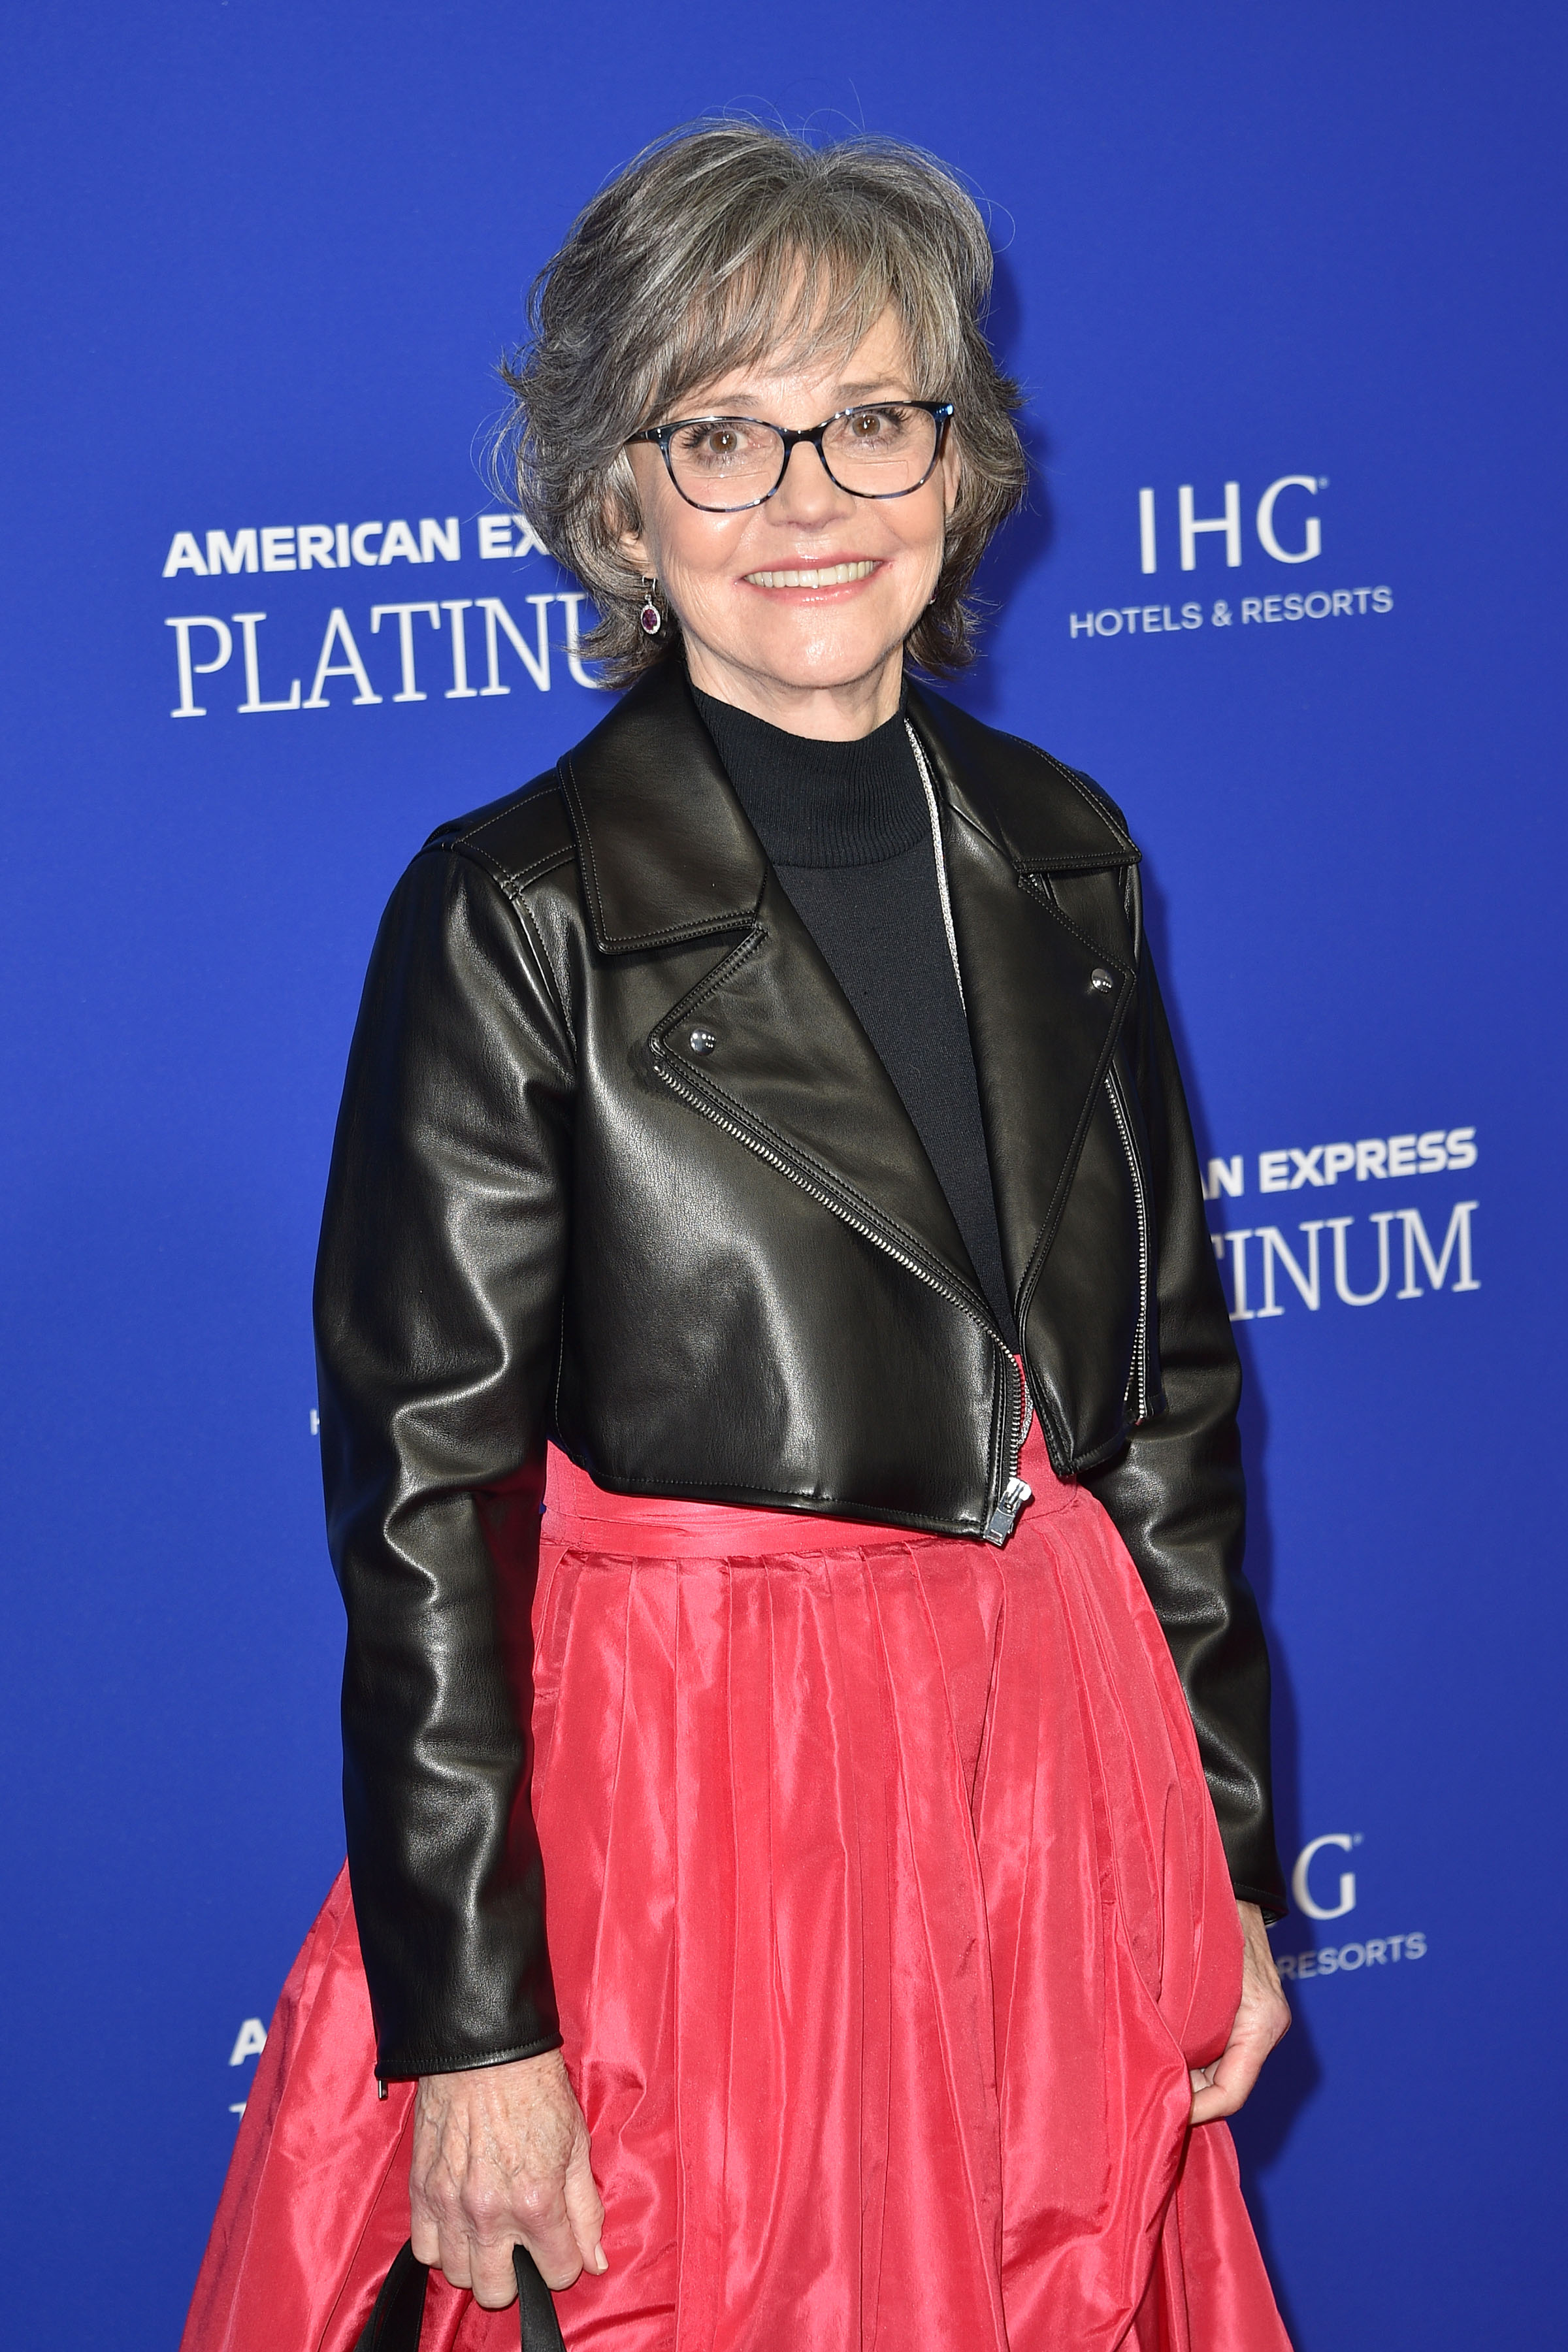 Sally Field attends the 34th Annual Palm Springs International Film Festival's Film Awards Gala Arrivals at Palm Springs Convention Center on January 05, 2023, in Palm Springs, California. | Source: Getty Images